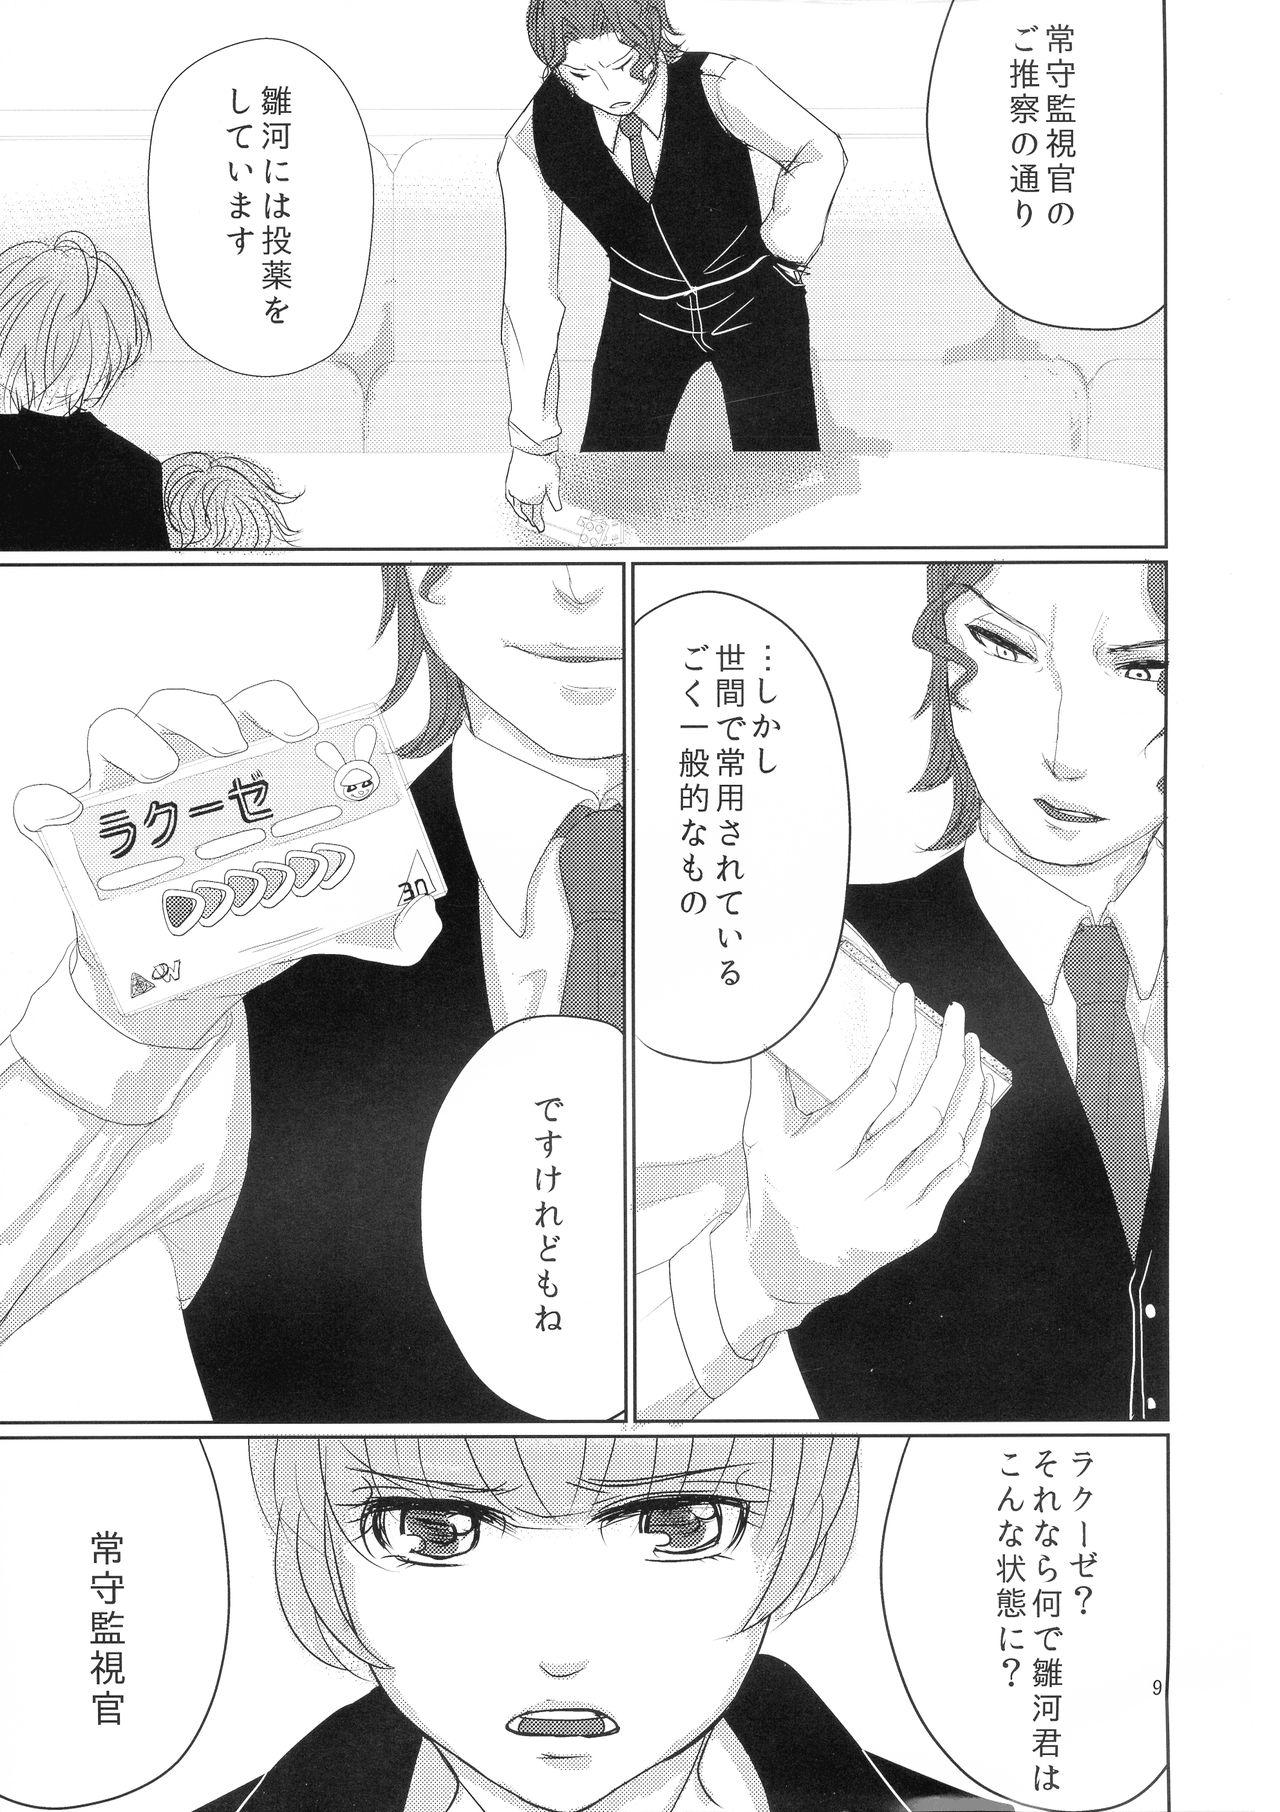 Spain CSD - Psycho pass  - Page 9